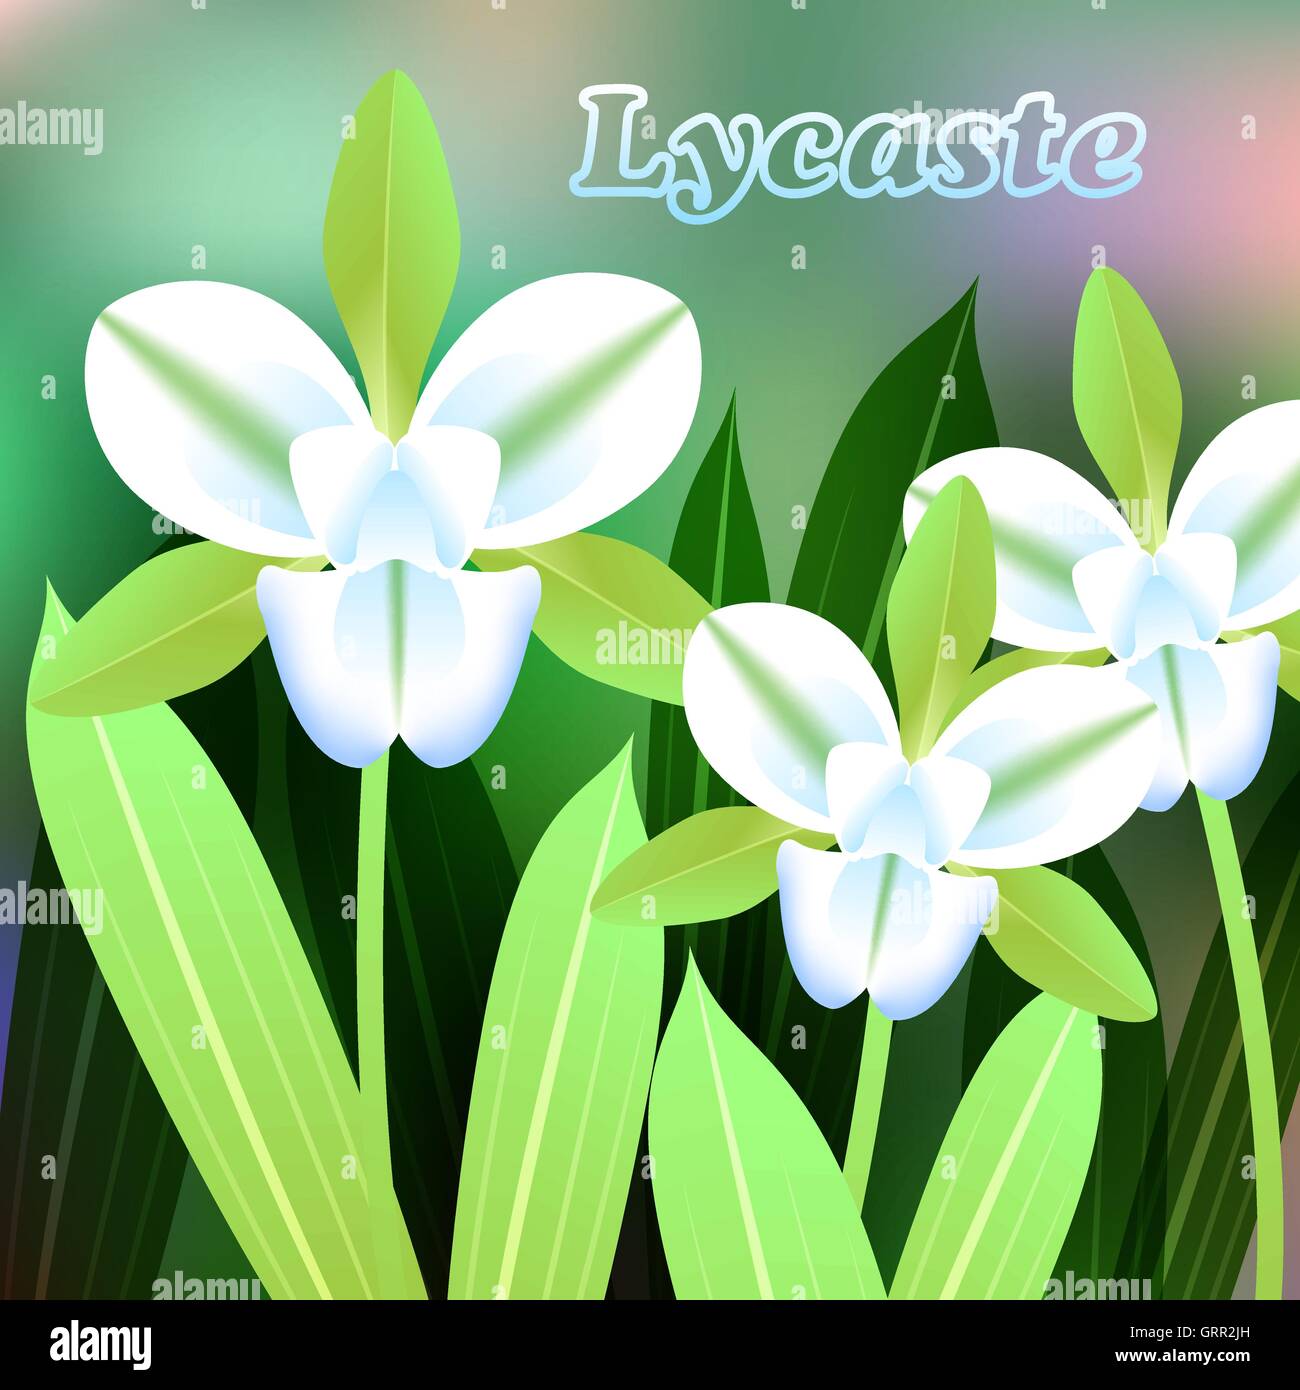 Beautiful Flower, Illustration of Lycaste orchid with Green Leaves on Tree Branch. Vector Stock Vector